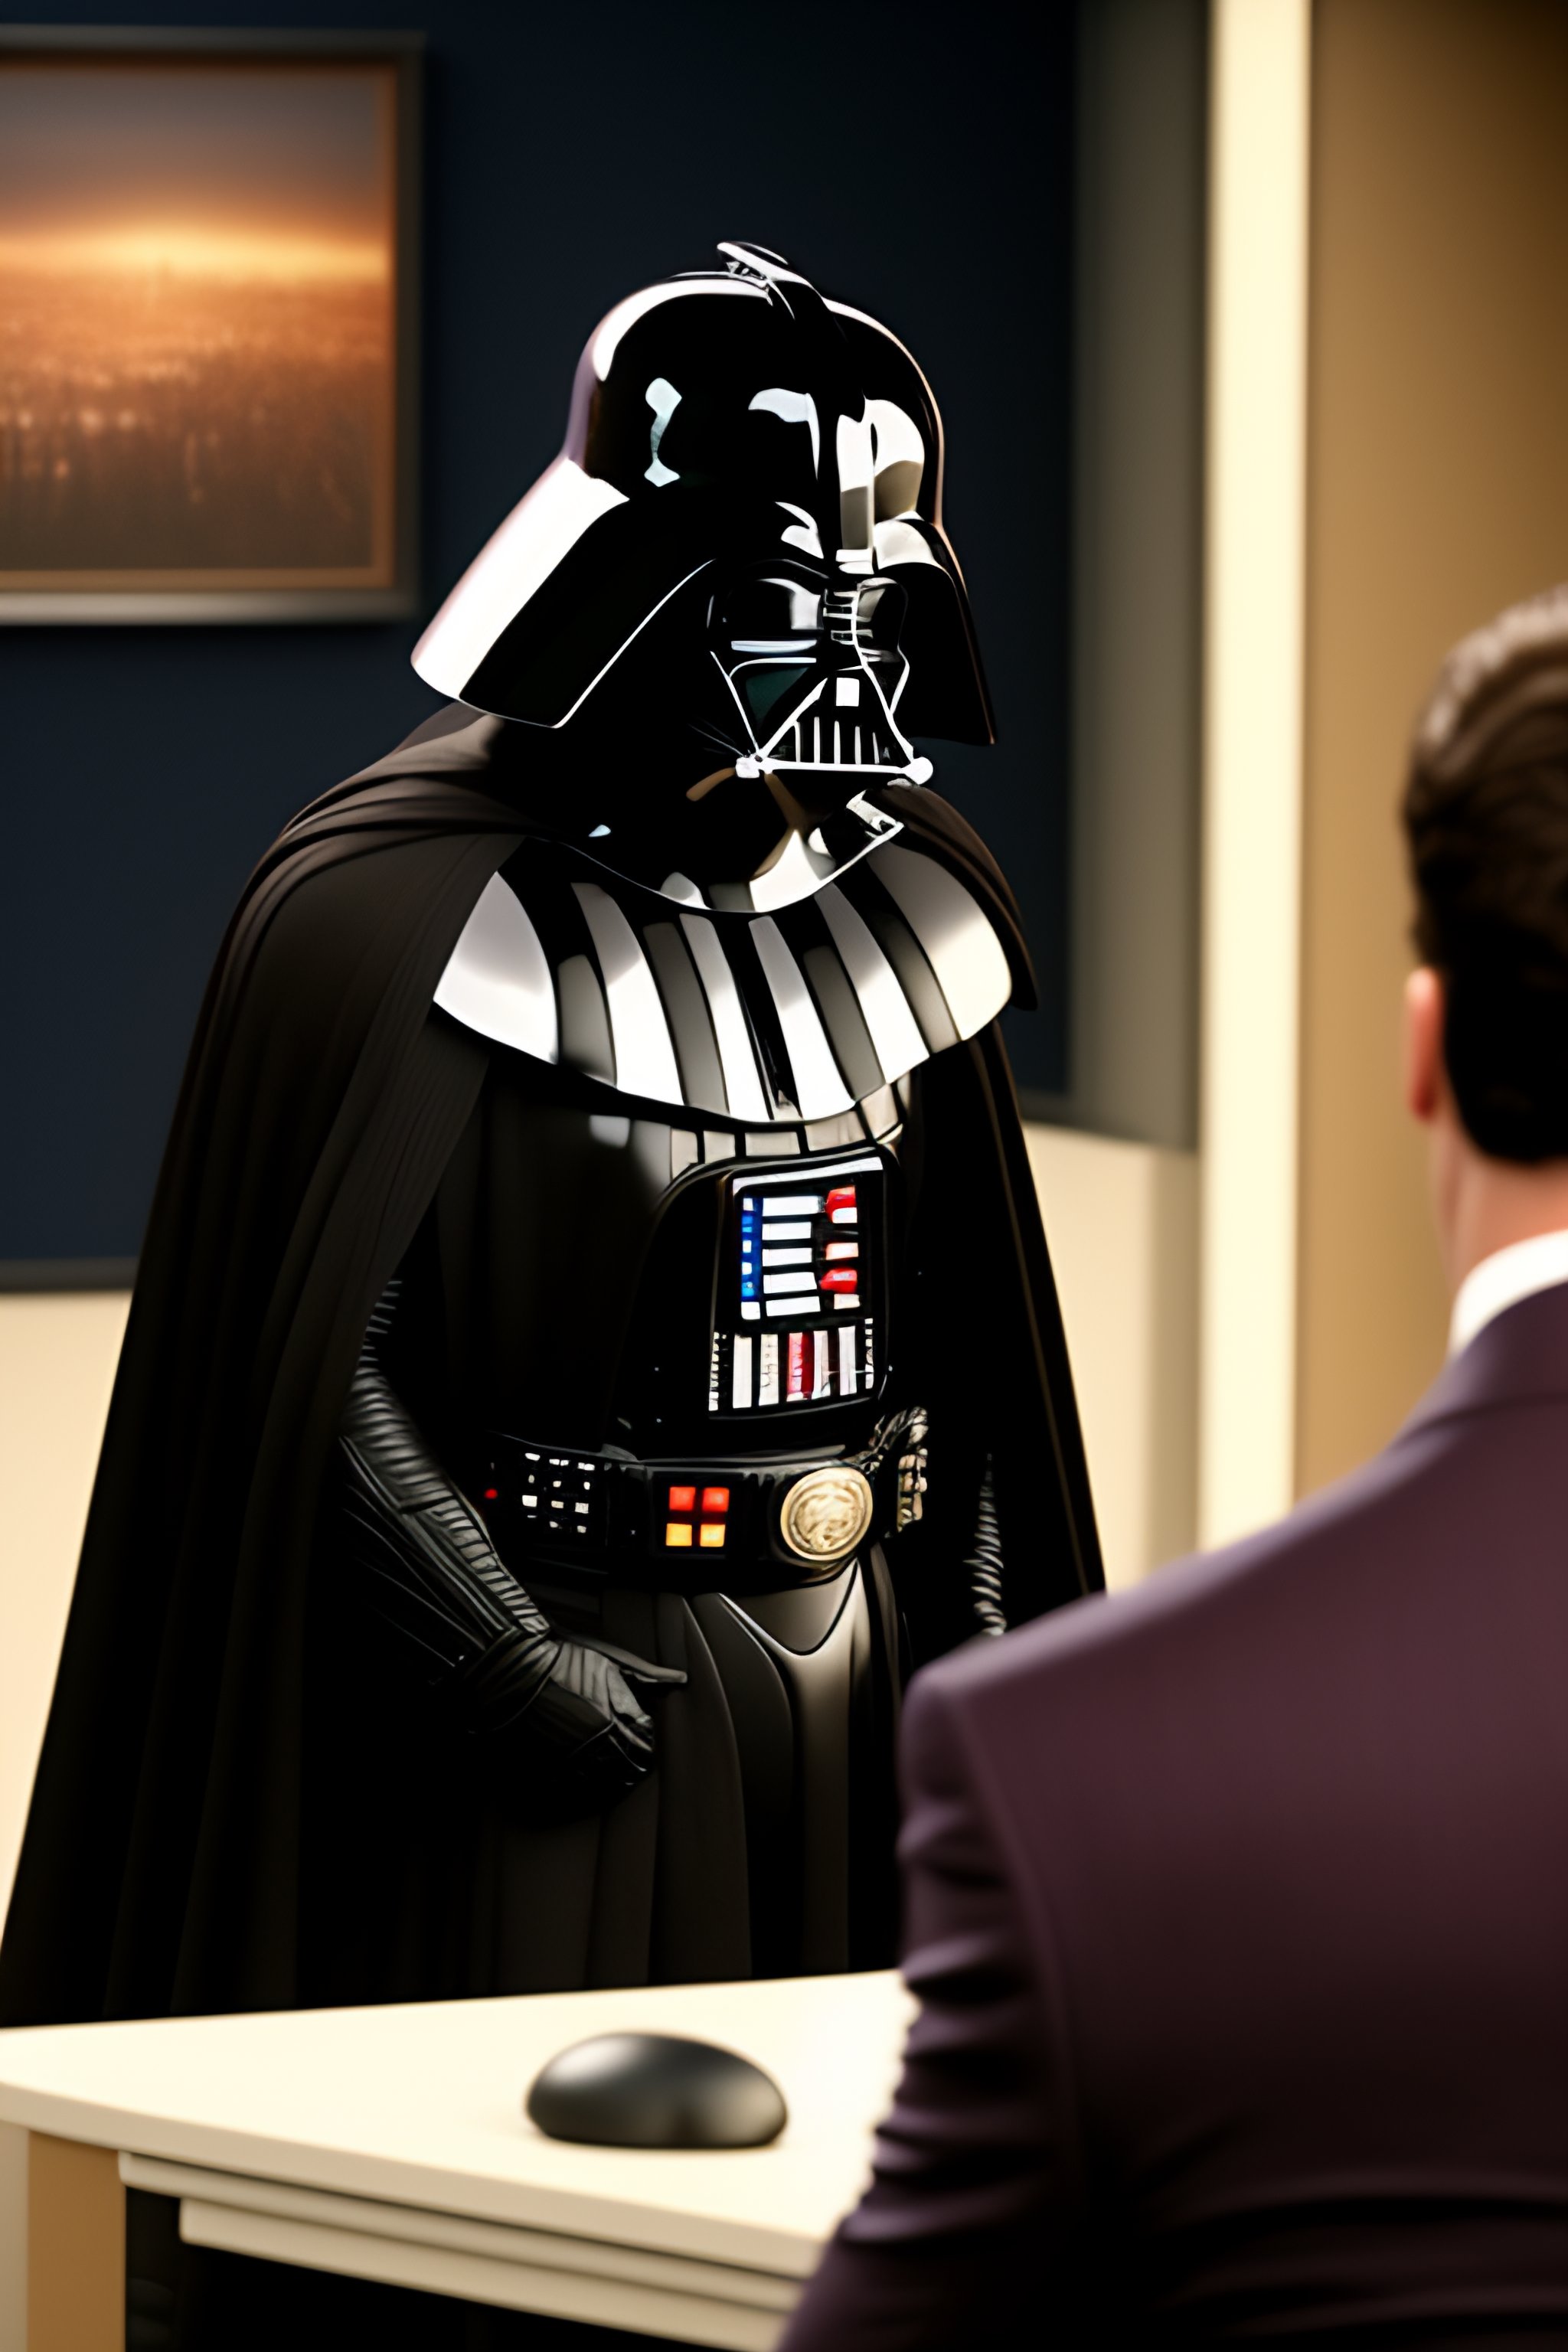 Lexica - Darth Vader from star wars giving an interview on the TV show 